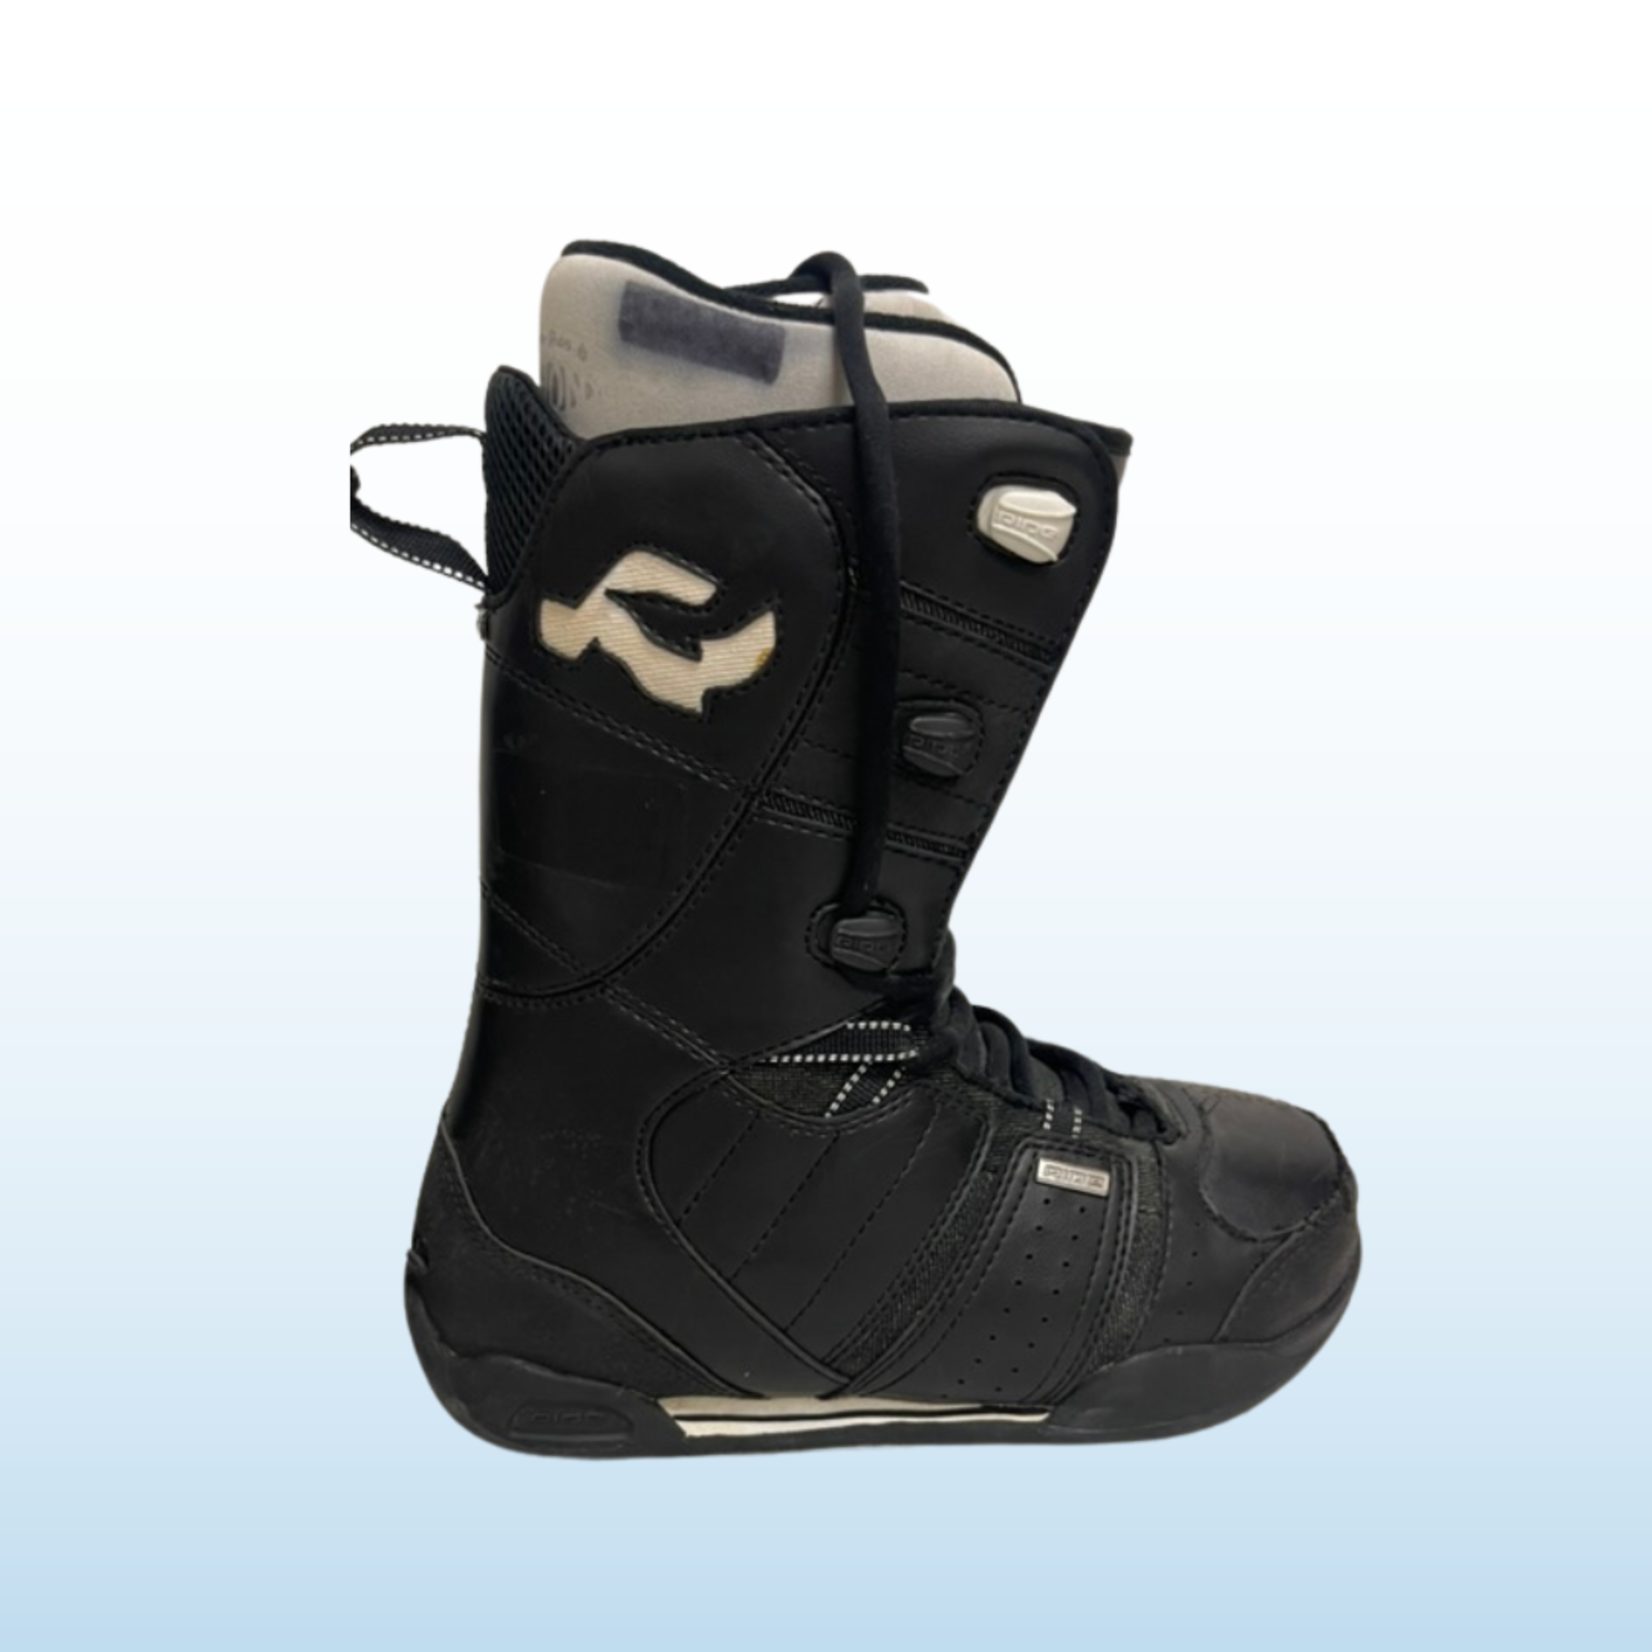 Ride Ride Women's Orion Lace Up Snowboard Boot SOLD AS IS NO REFUNDS OR EXCHANGES